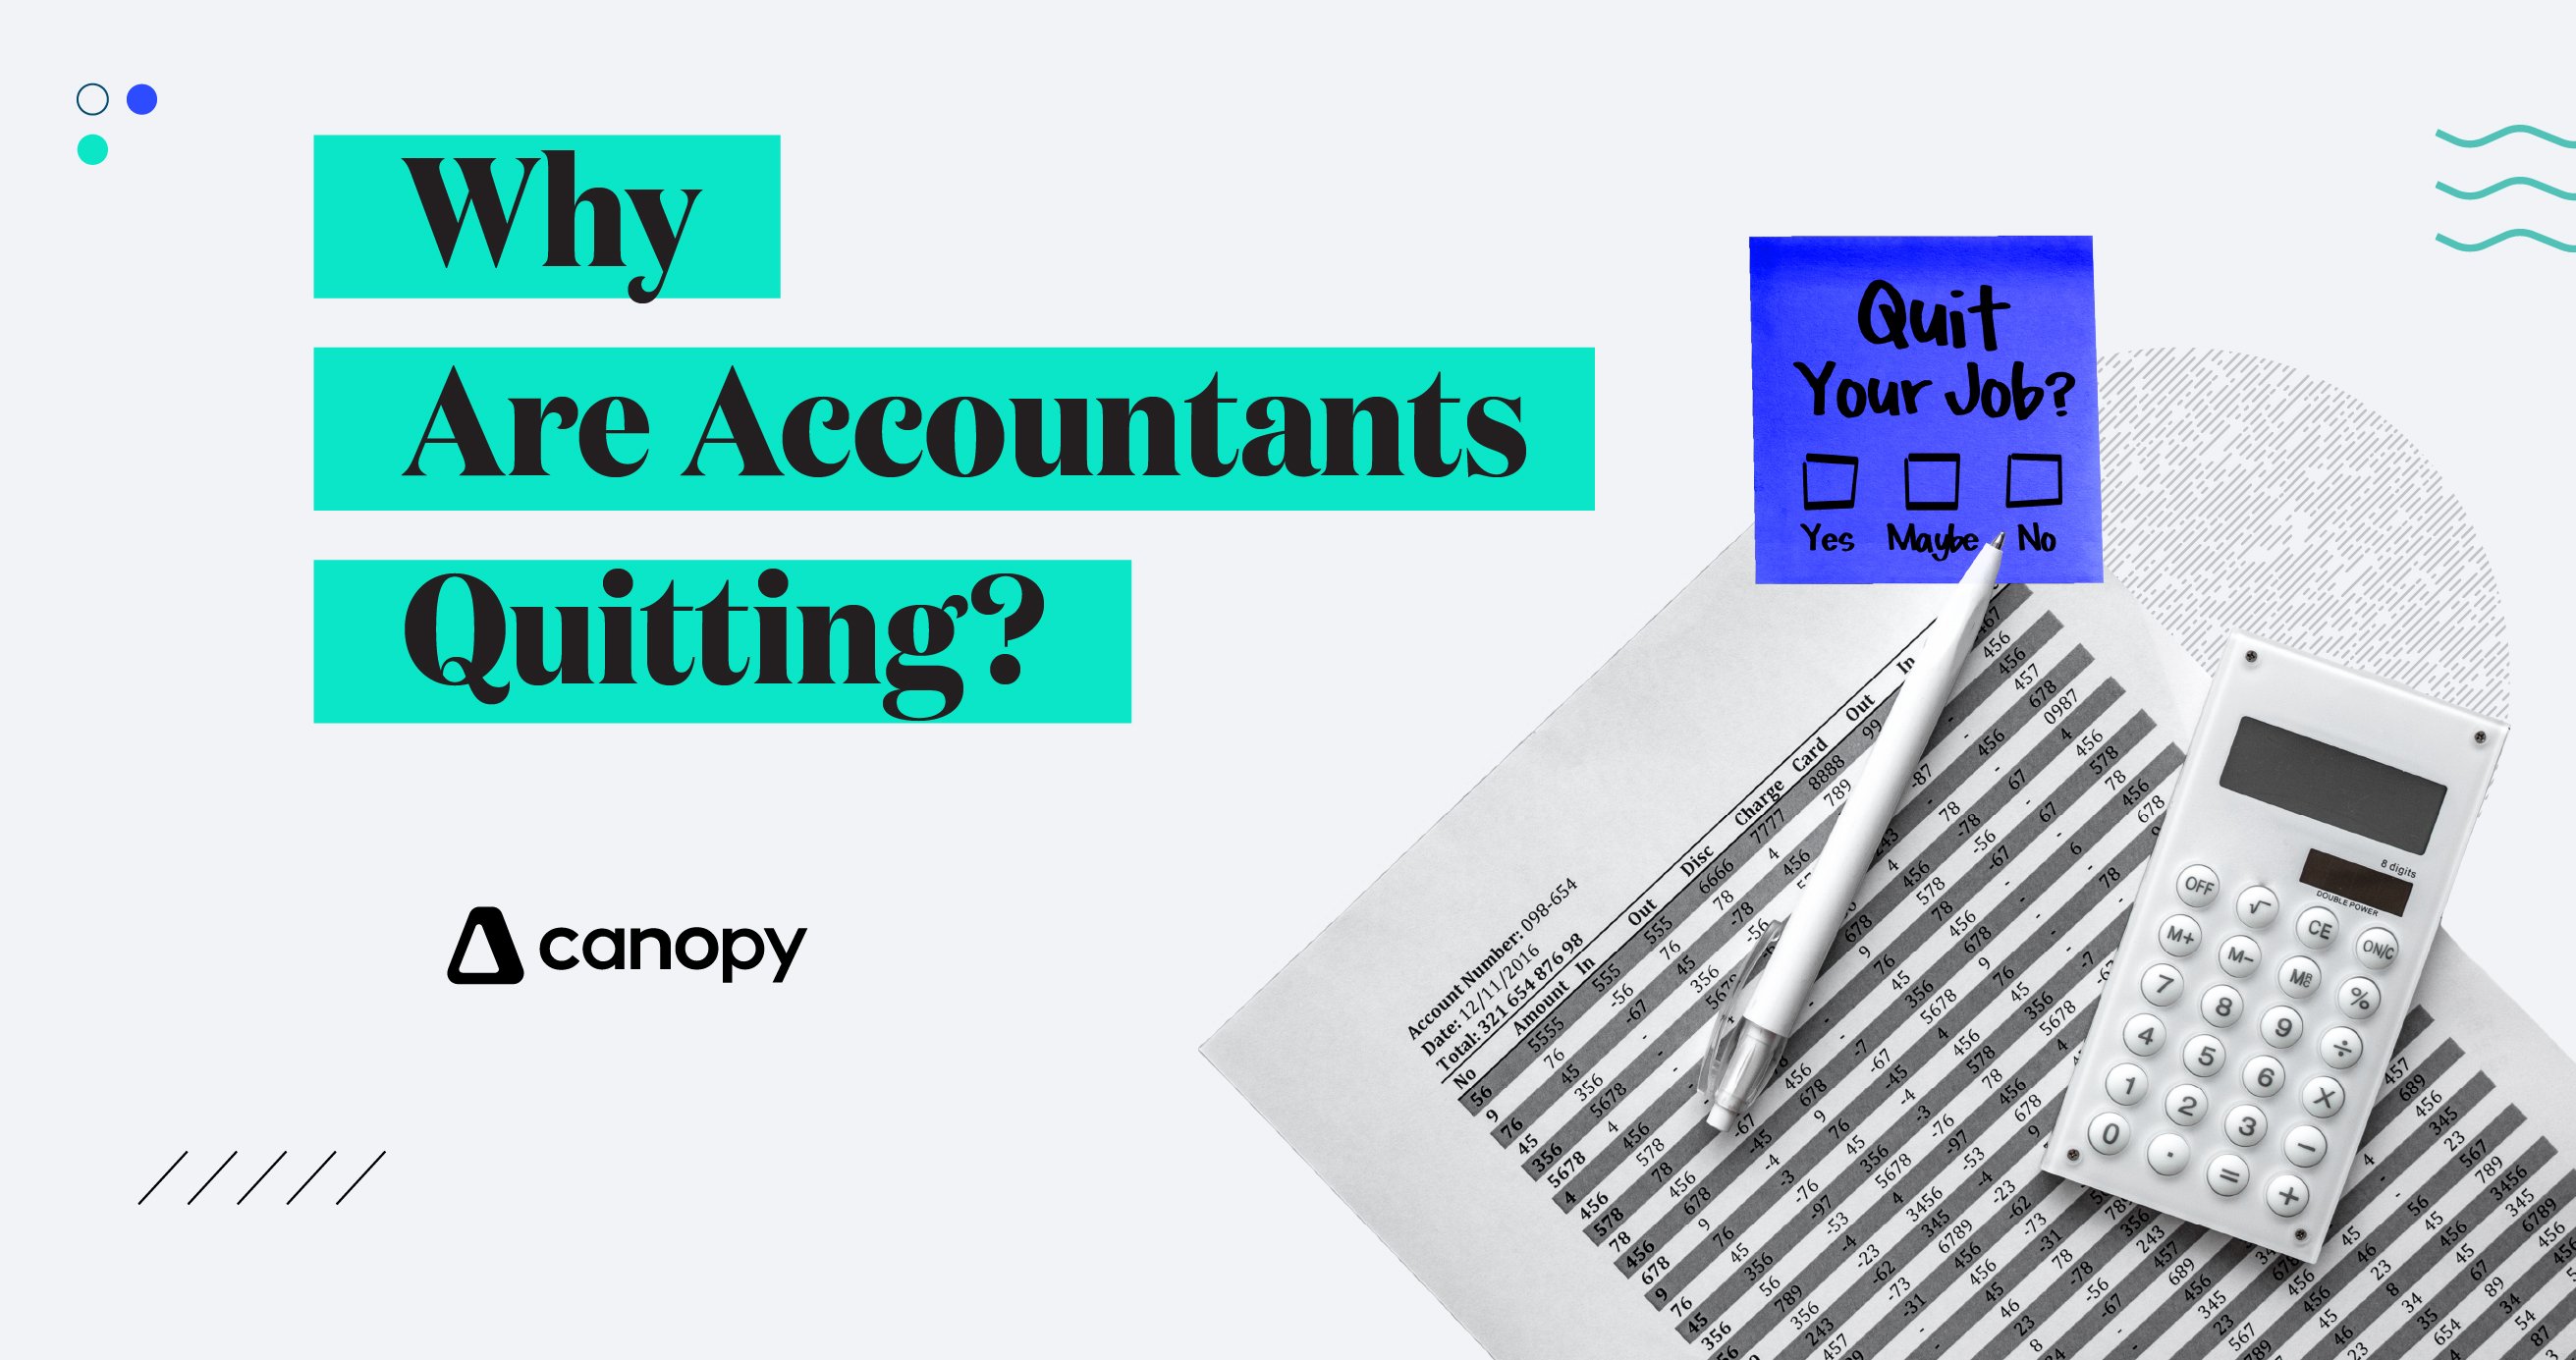 Why Are Accountants Quitting?